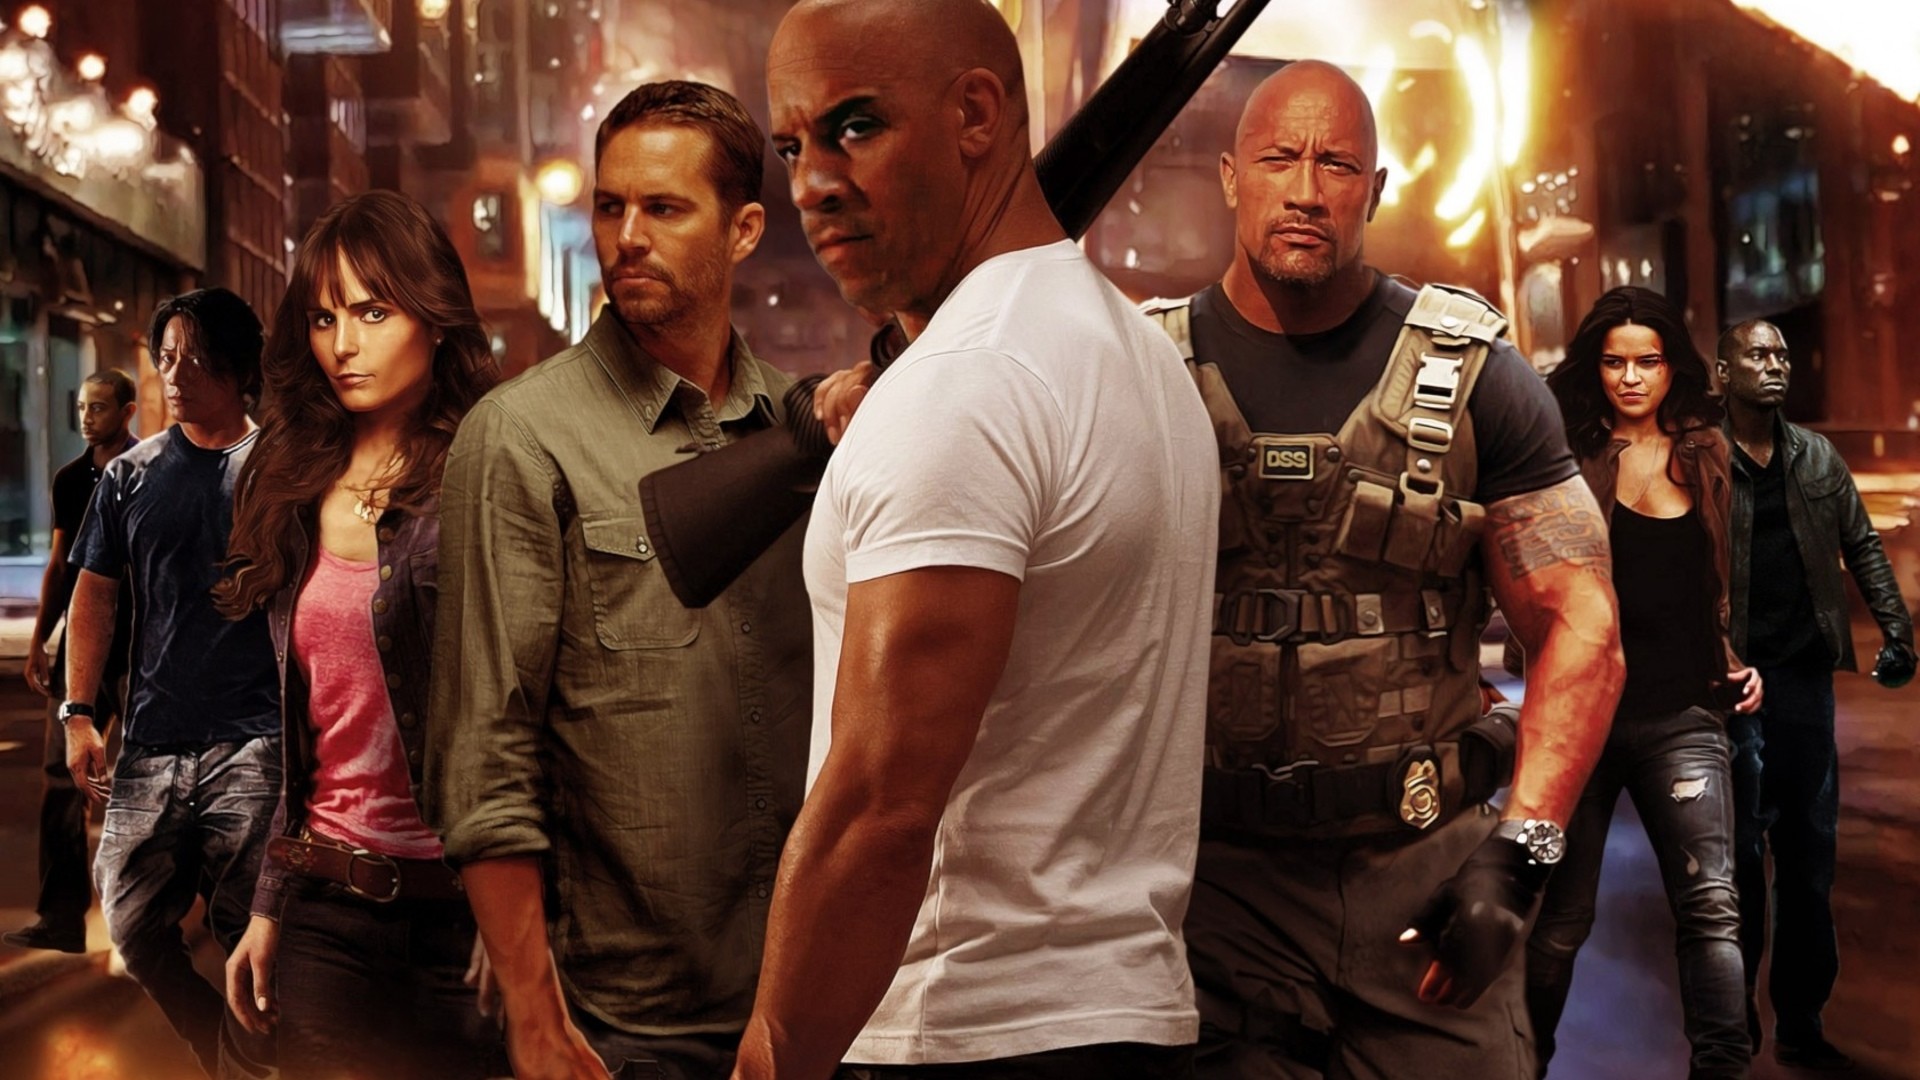 1920x1080 movie fast and furios Â· fast and furious 7